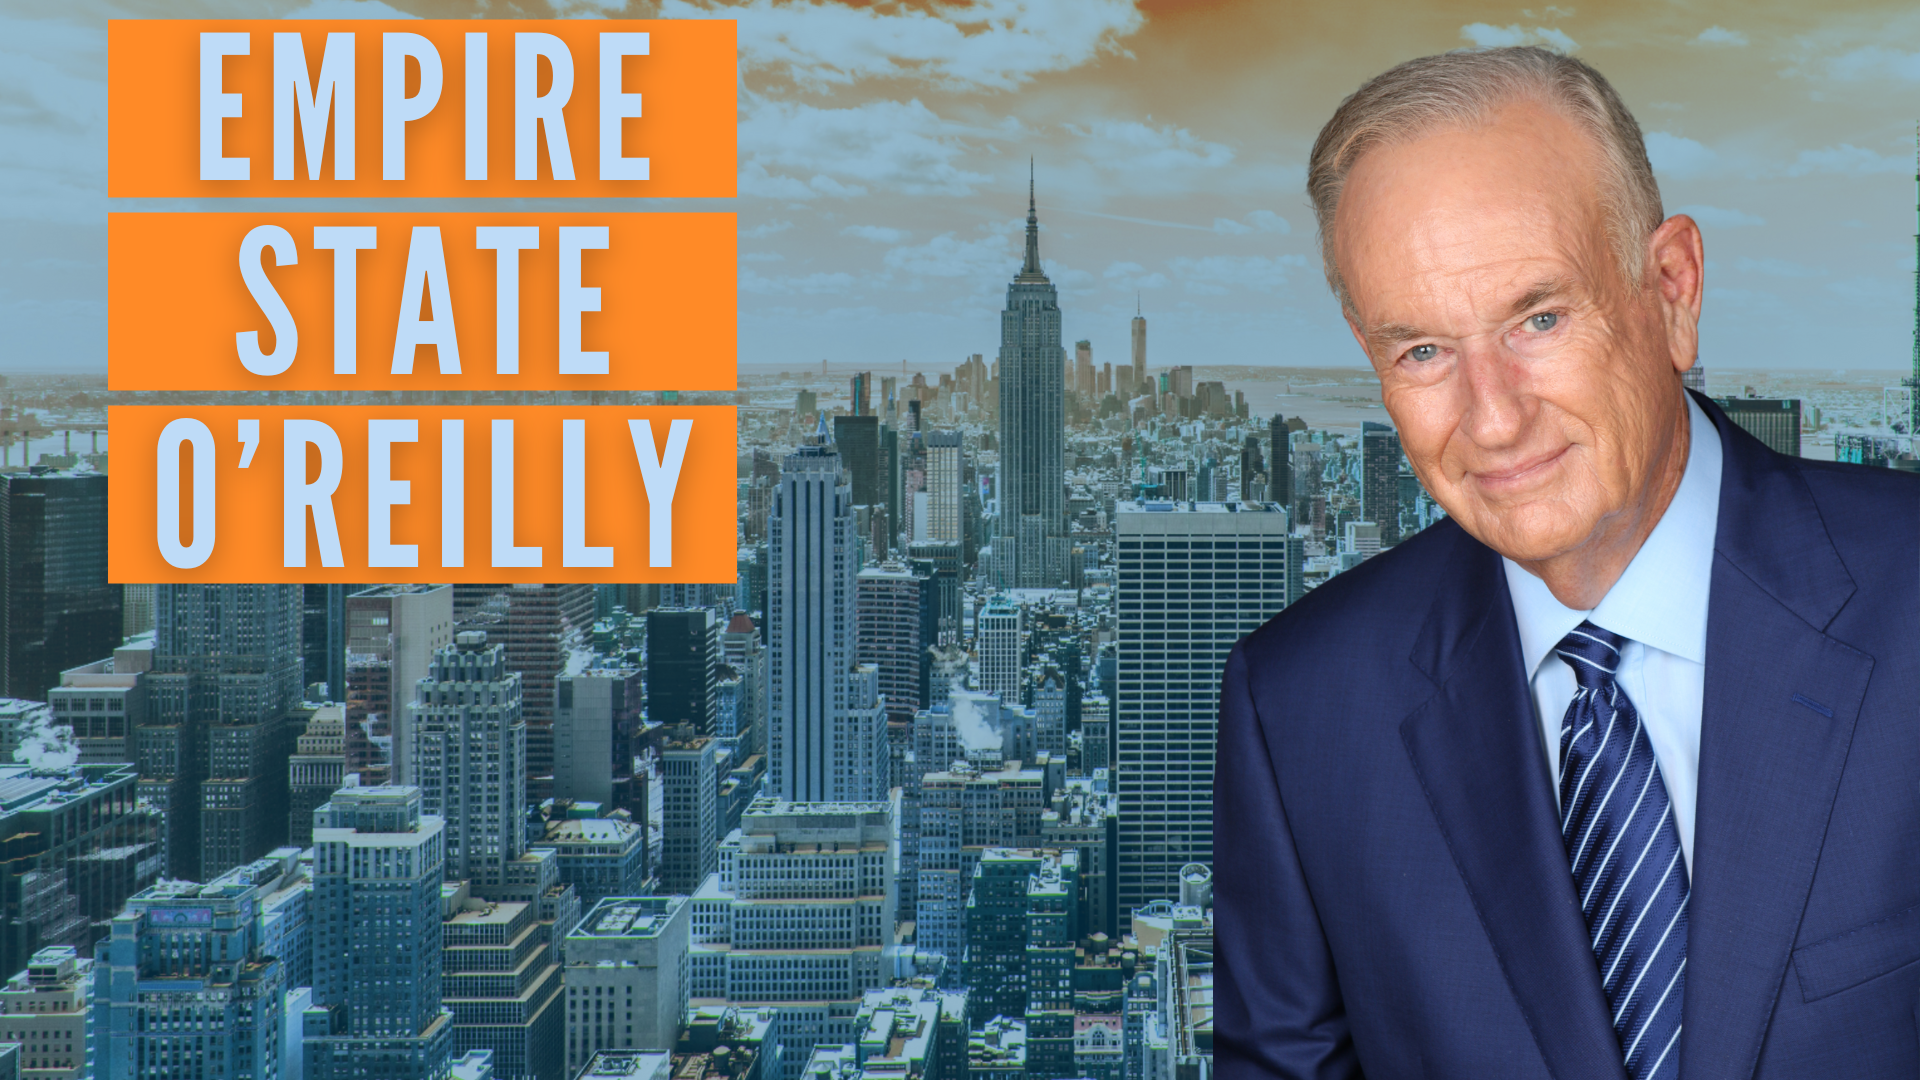 Empire State O'Reilly: Displays of Hate